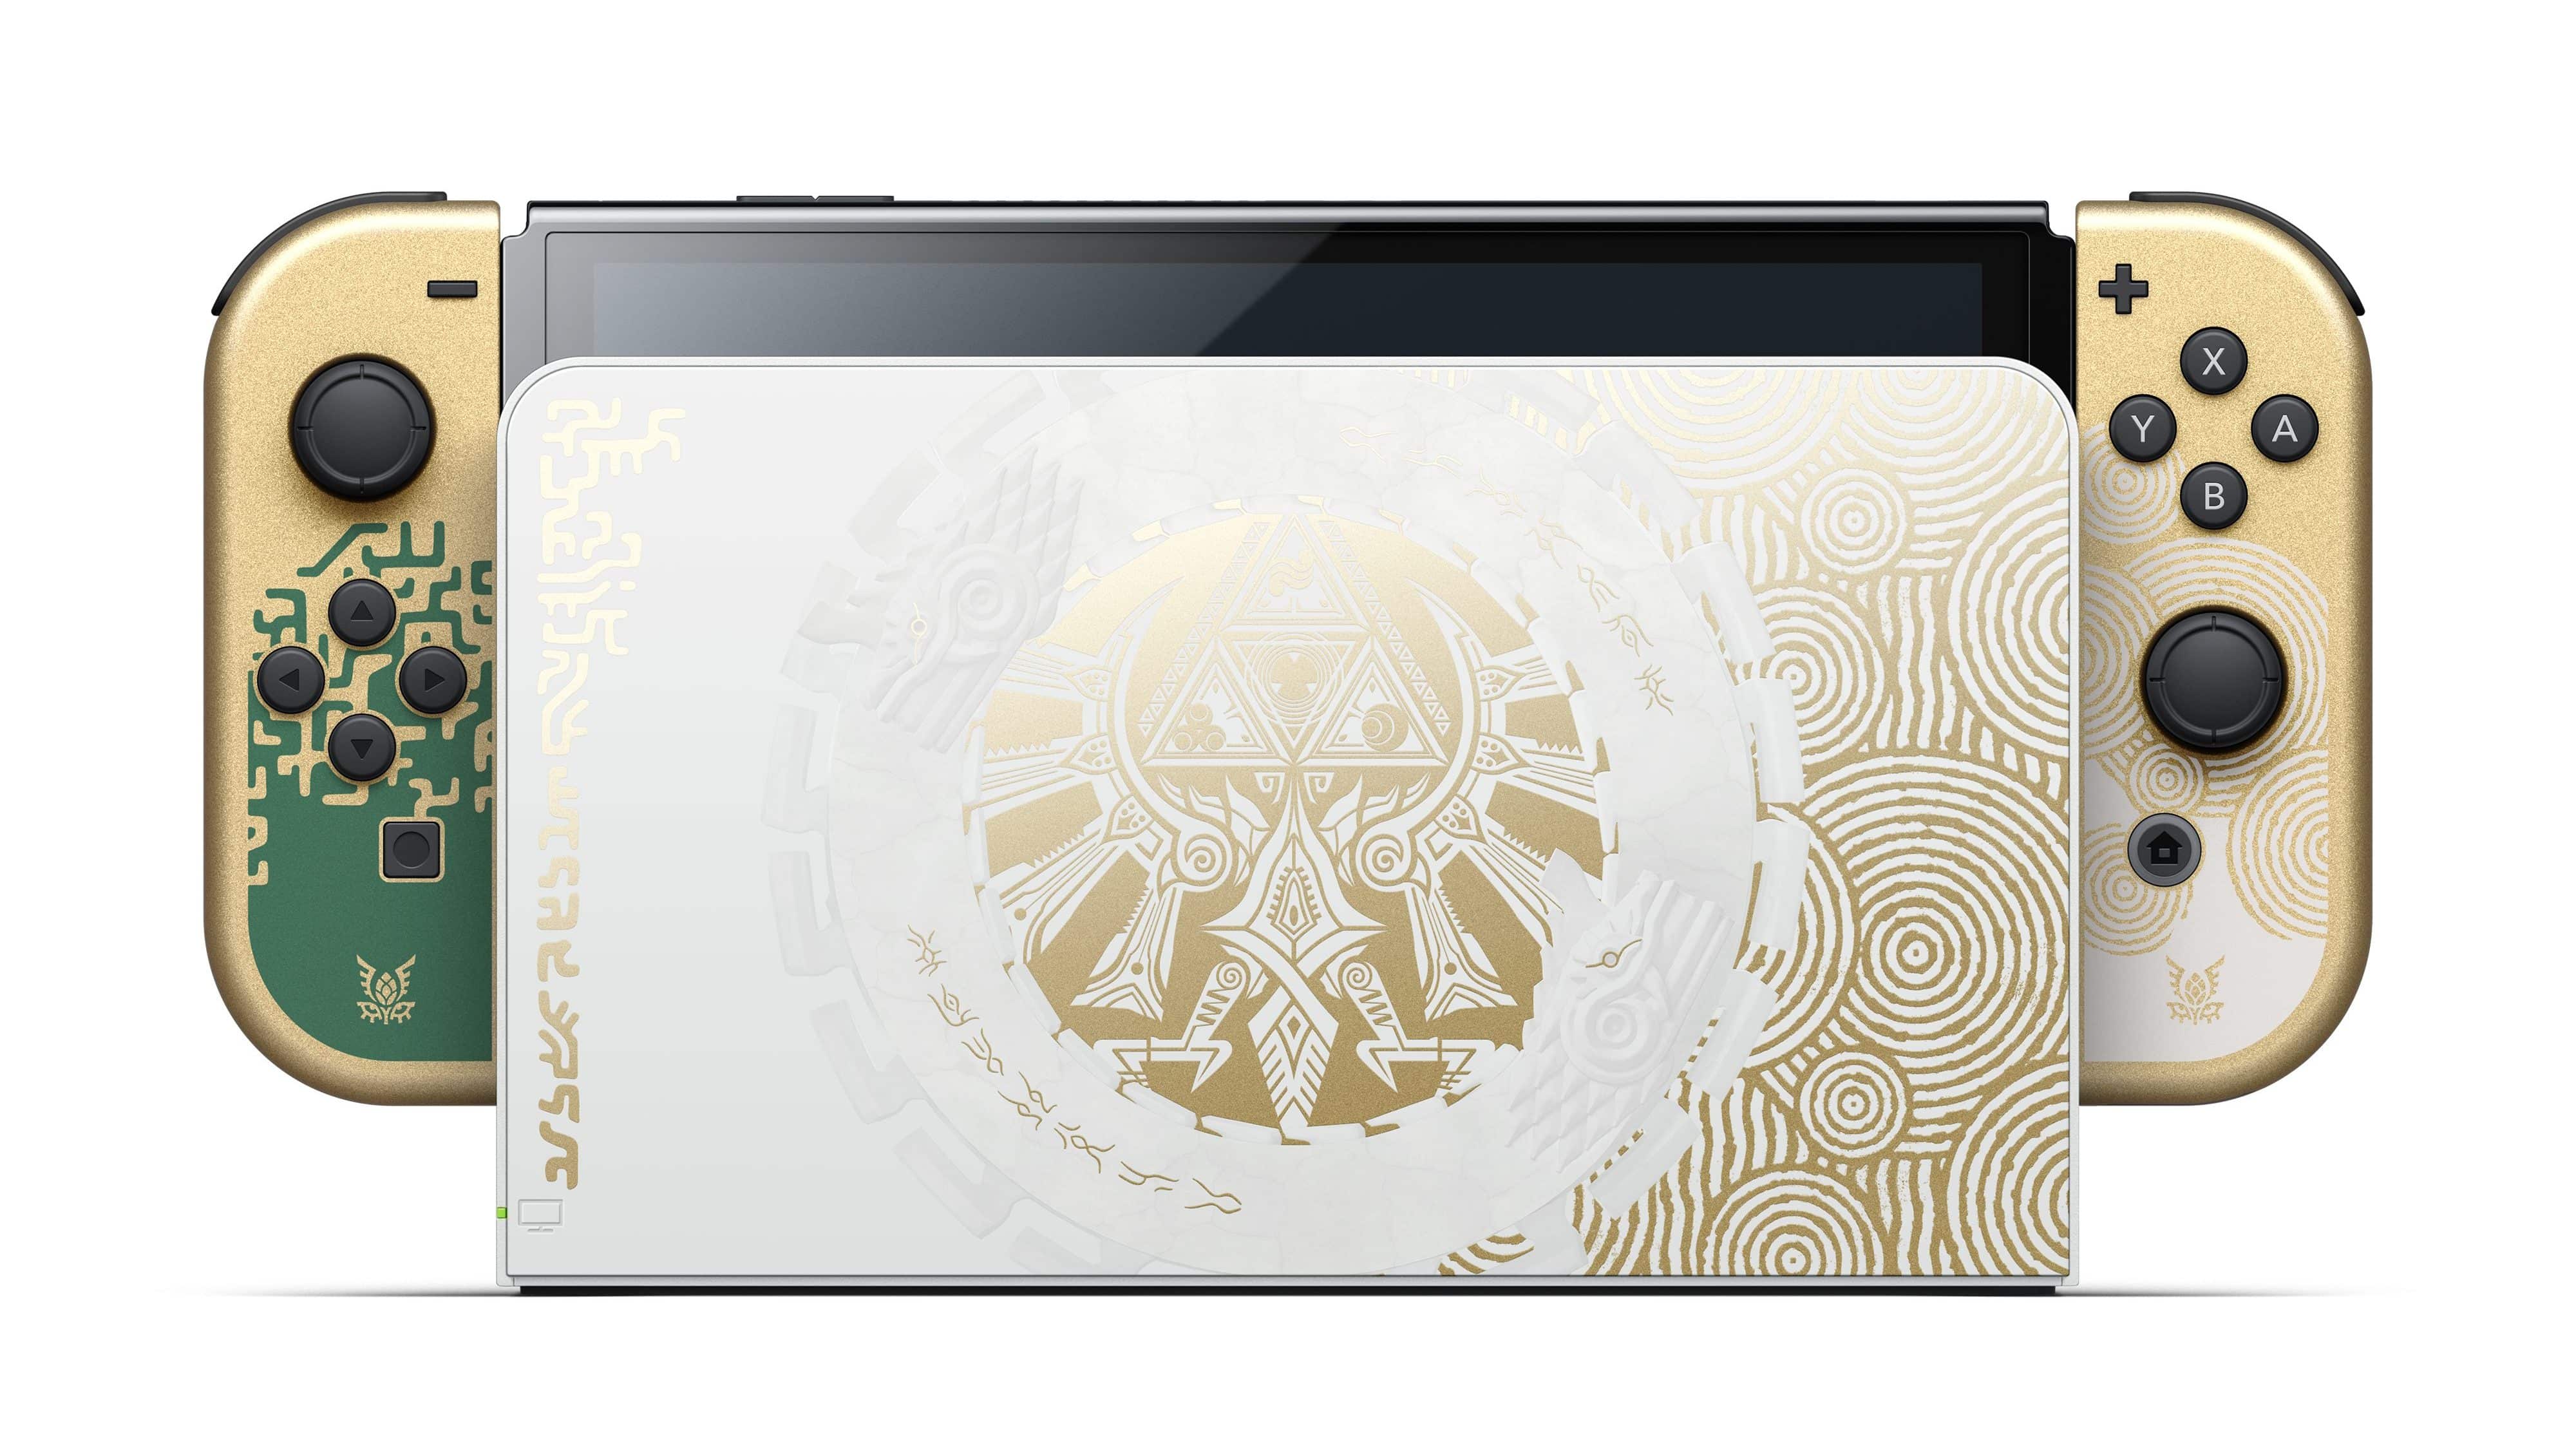 Zelda: Tears of the Kingdom Switch OLED console release date